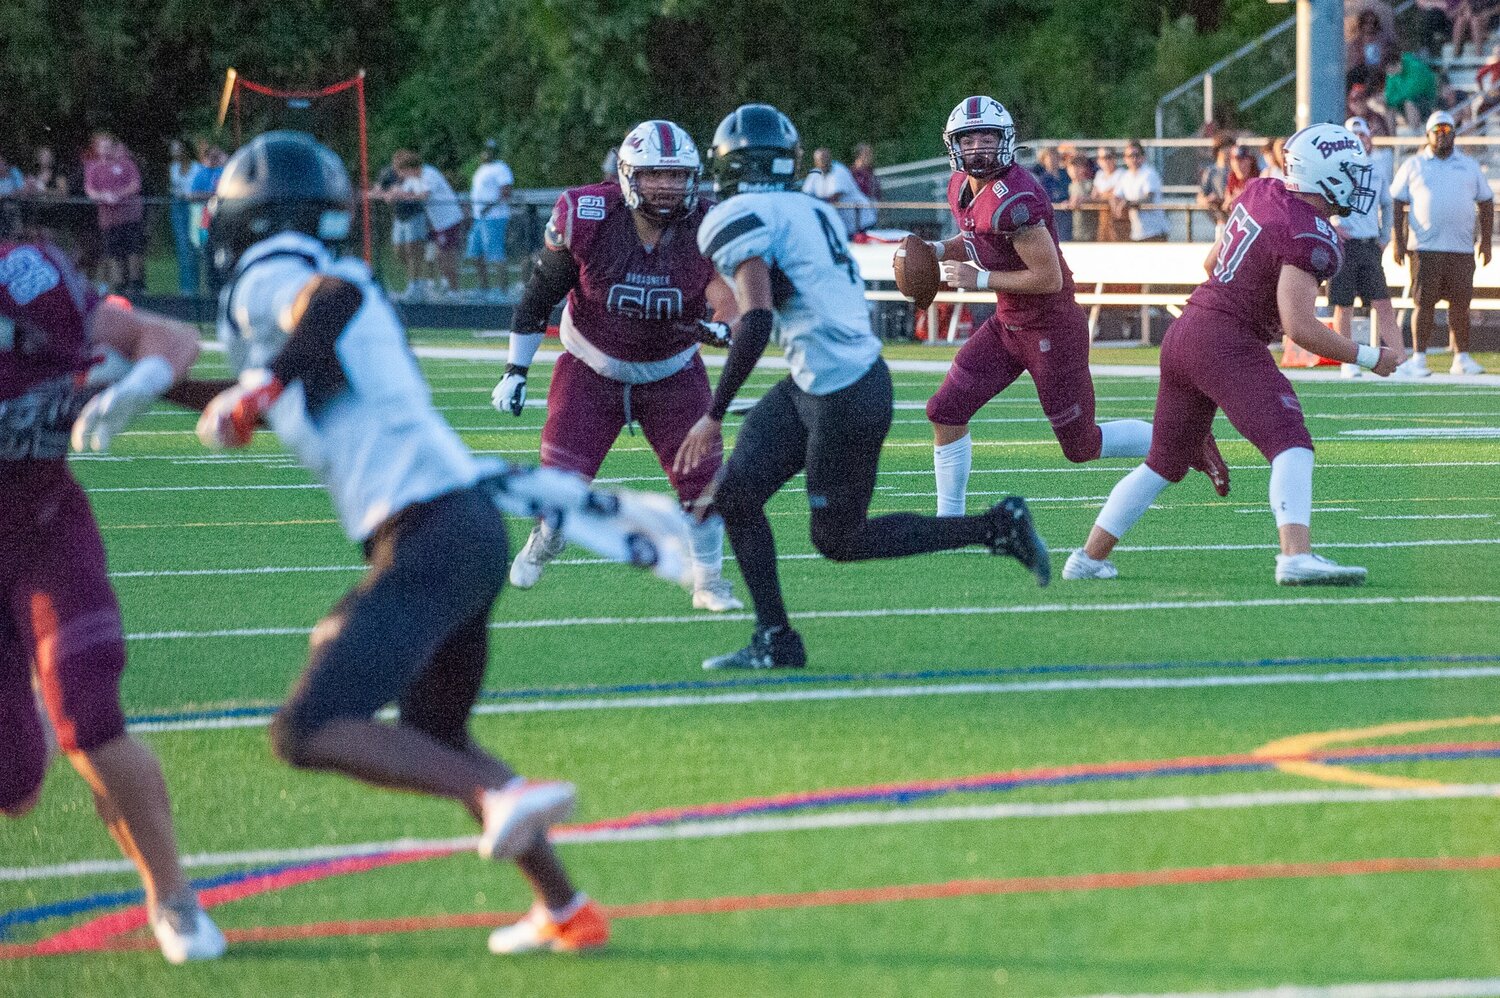 Broadneck quarterback Nate Tapley (9) scanned the field for an open receiver.